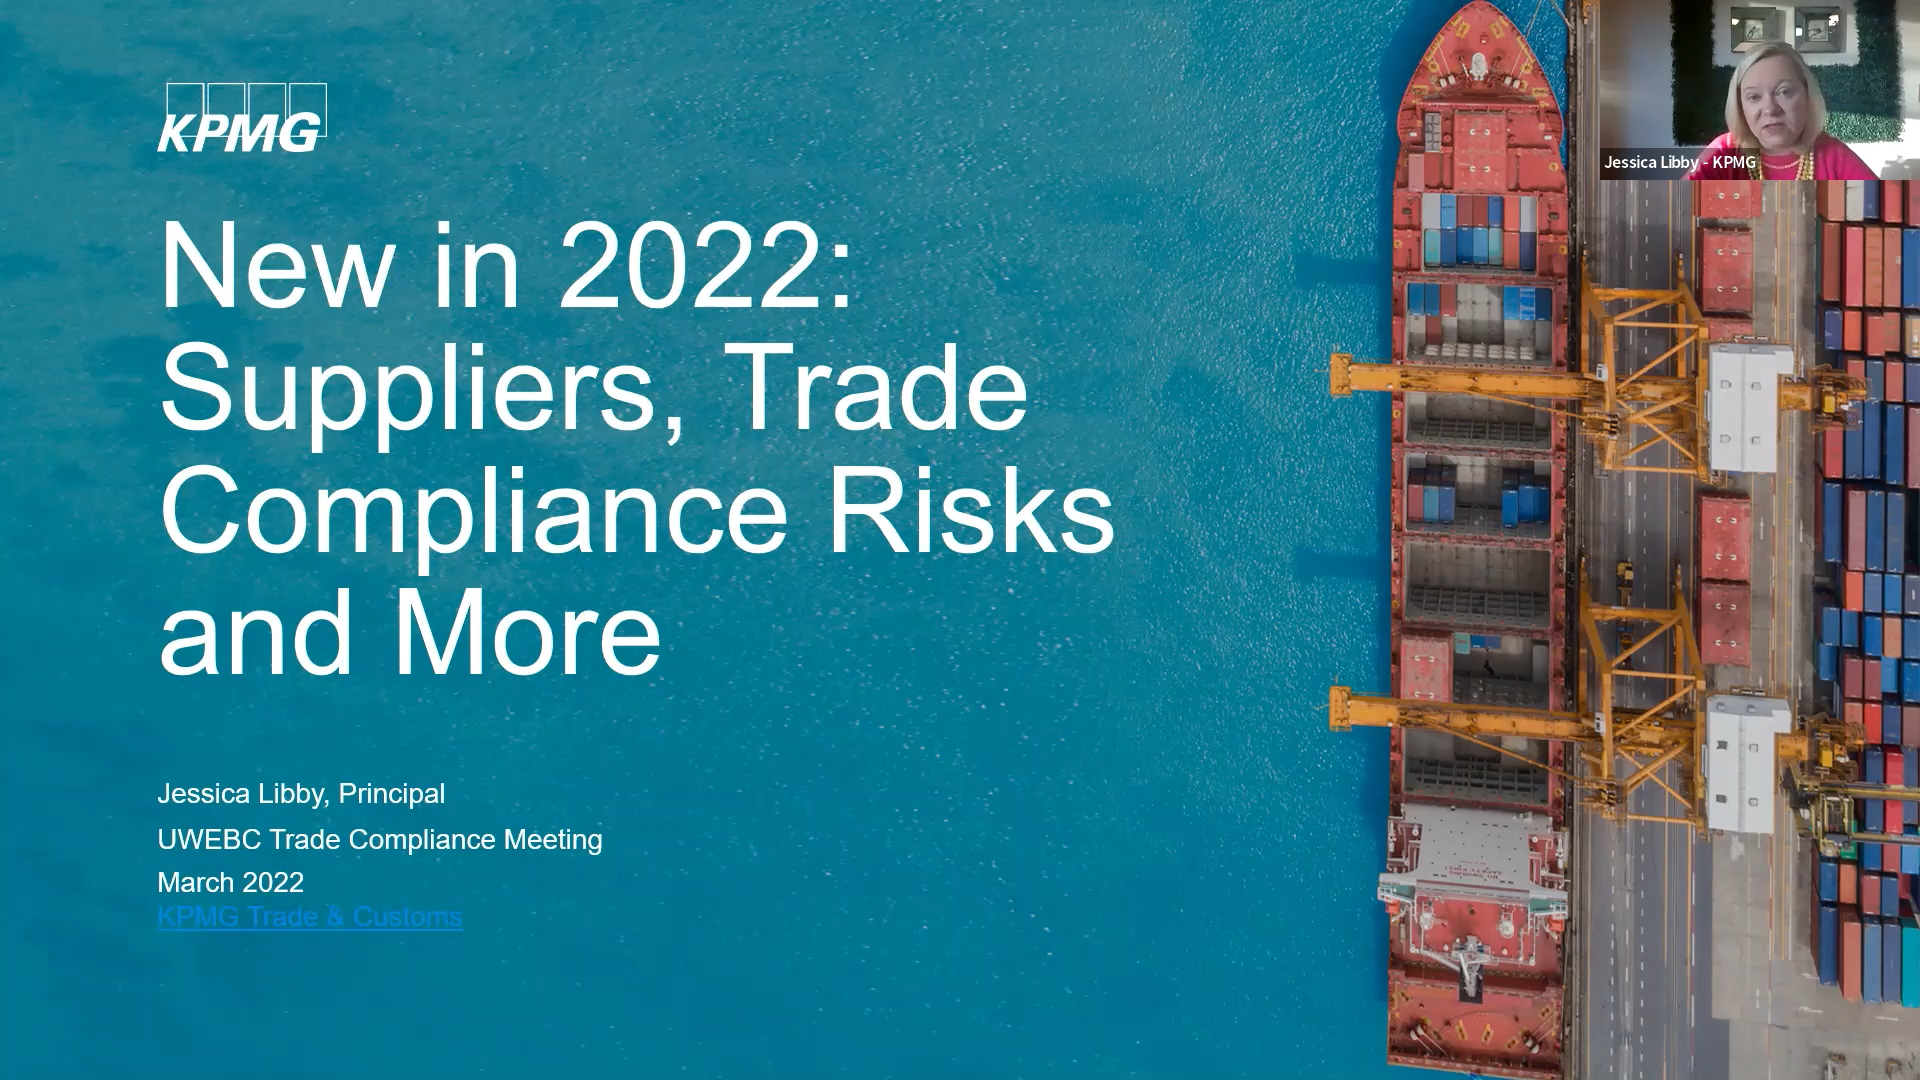 3. KPMG Presentation: New in 2022: Suppliers, Trade Compliance Risks and More thumbnail